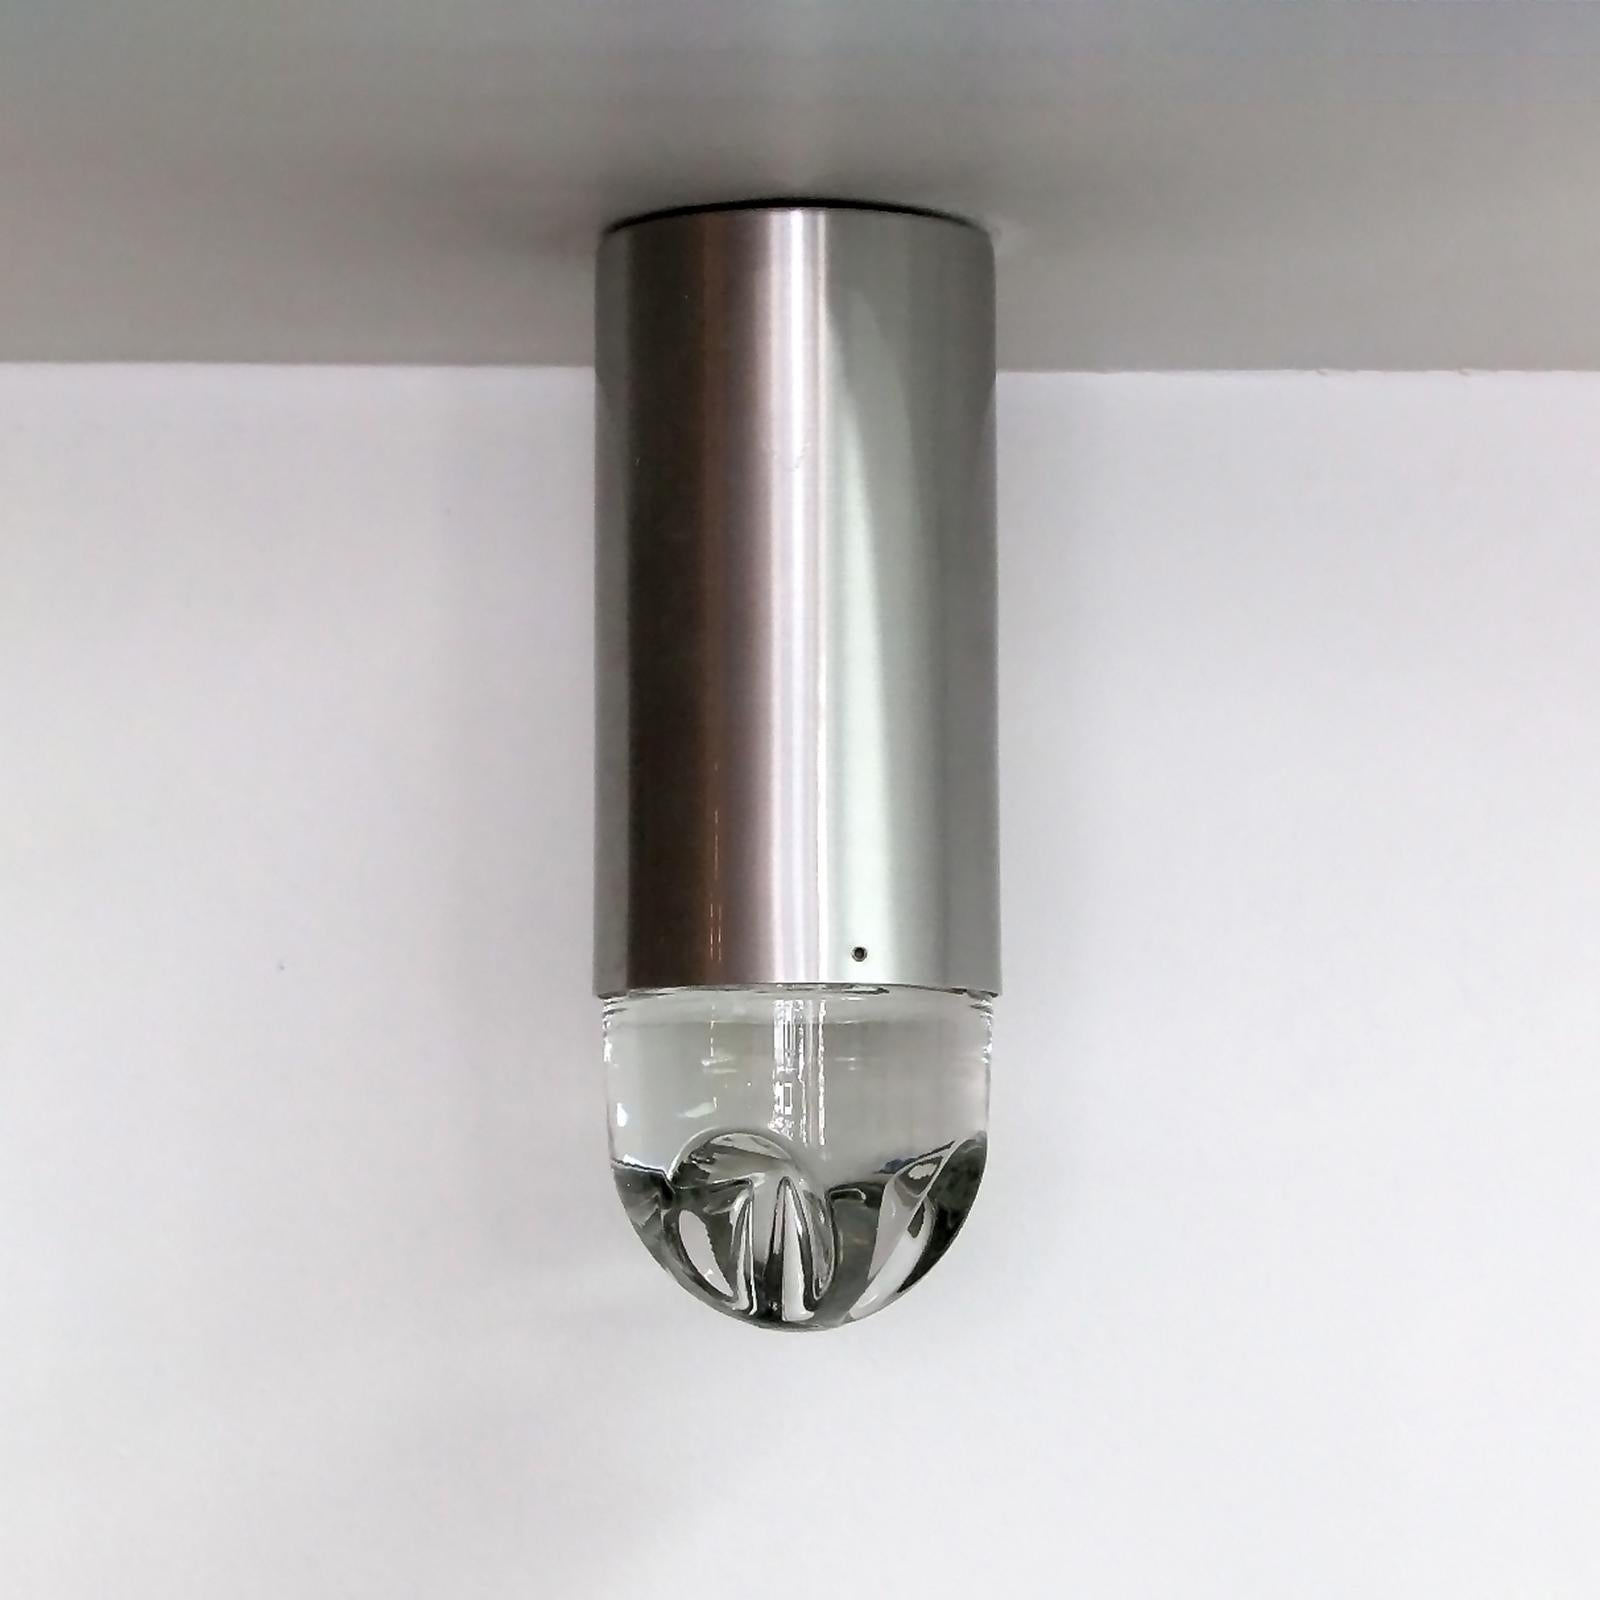 RAAK Ceiling Flushmount Lights, 1960 In Good Condition For Sale In Los Angeles, CA